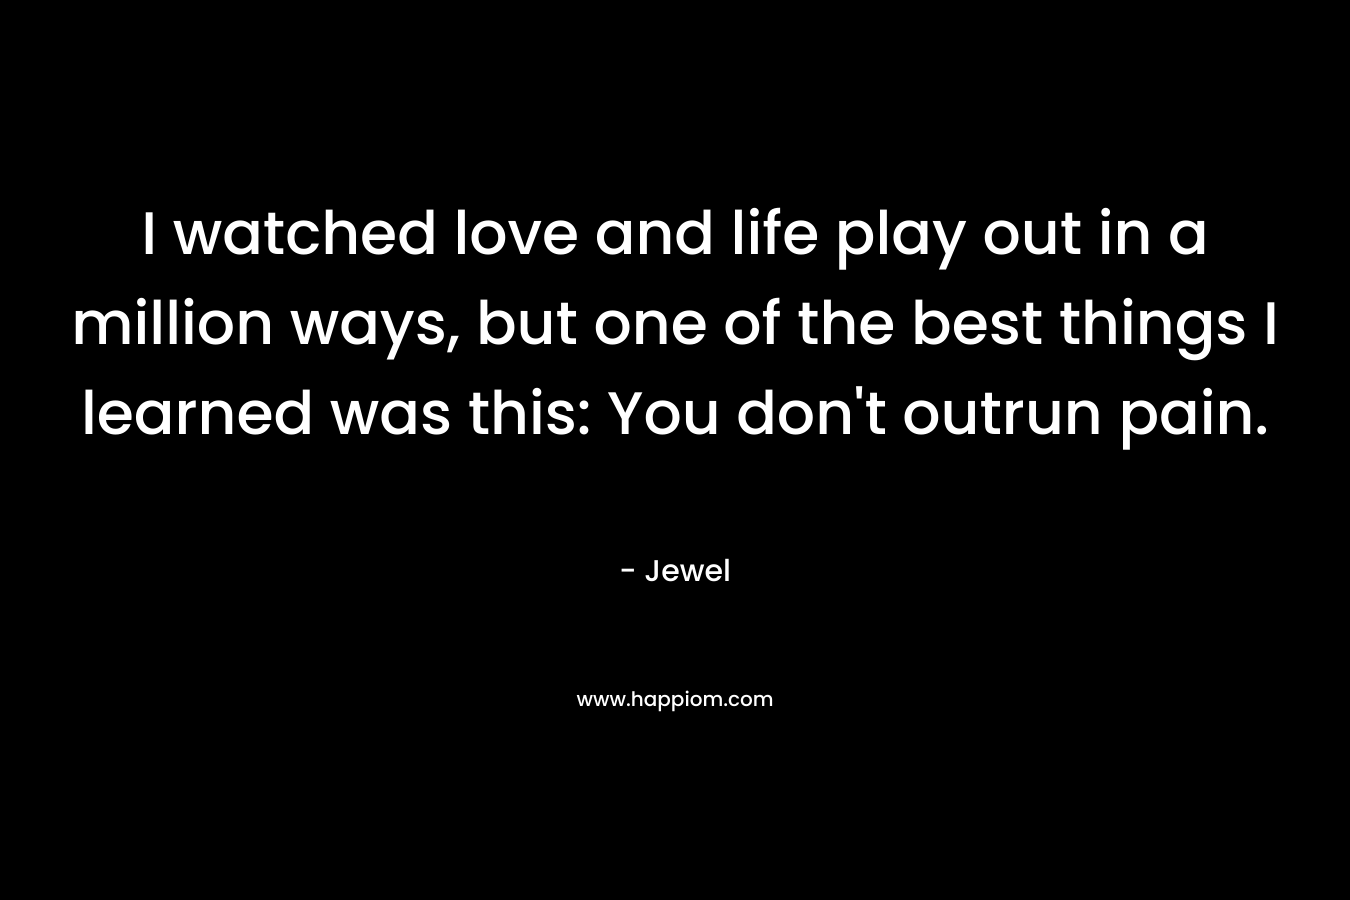 I watched love and life play out in a million ways, but one of the best things I learned was this: You don’t outrun pain. – Jewel